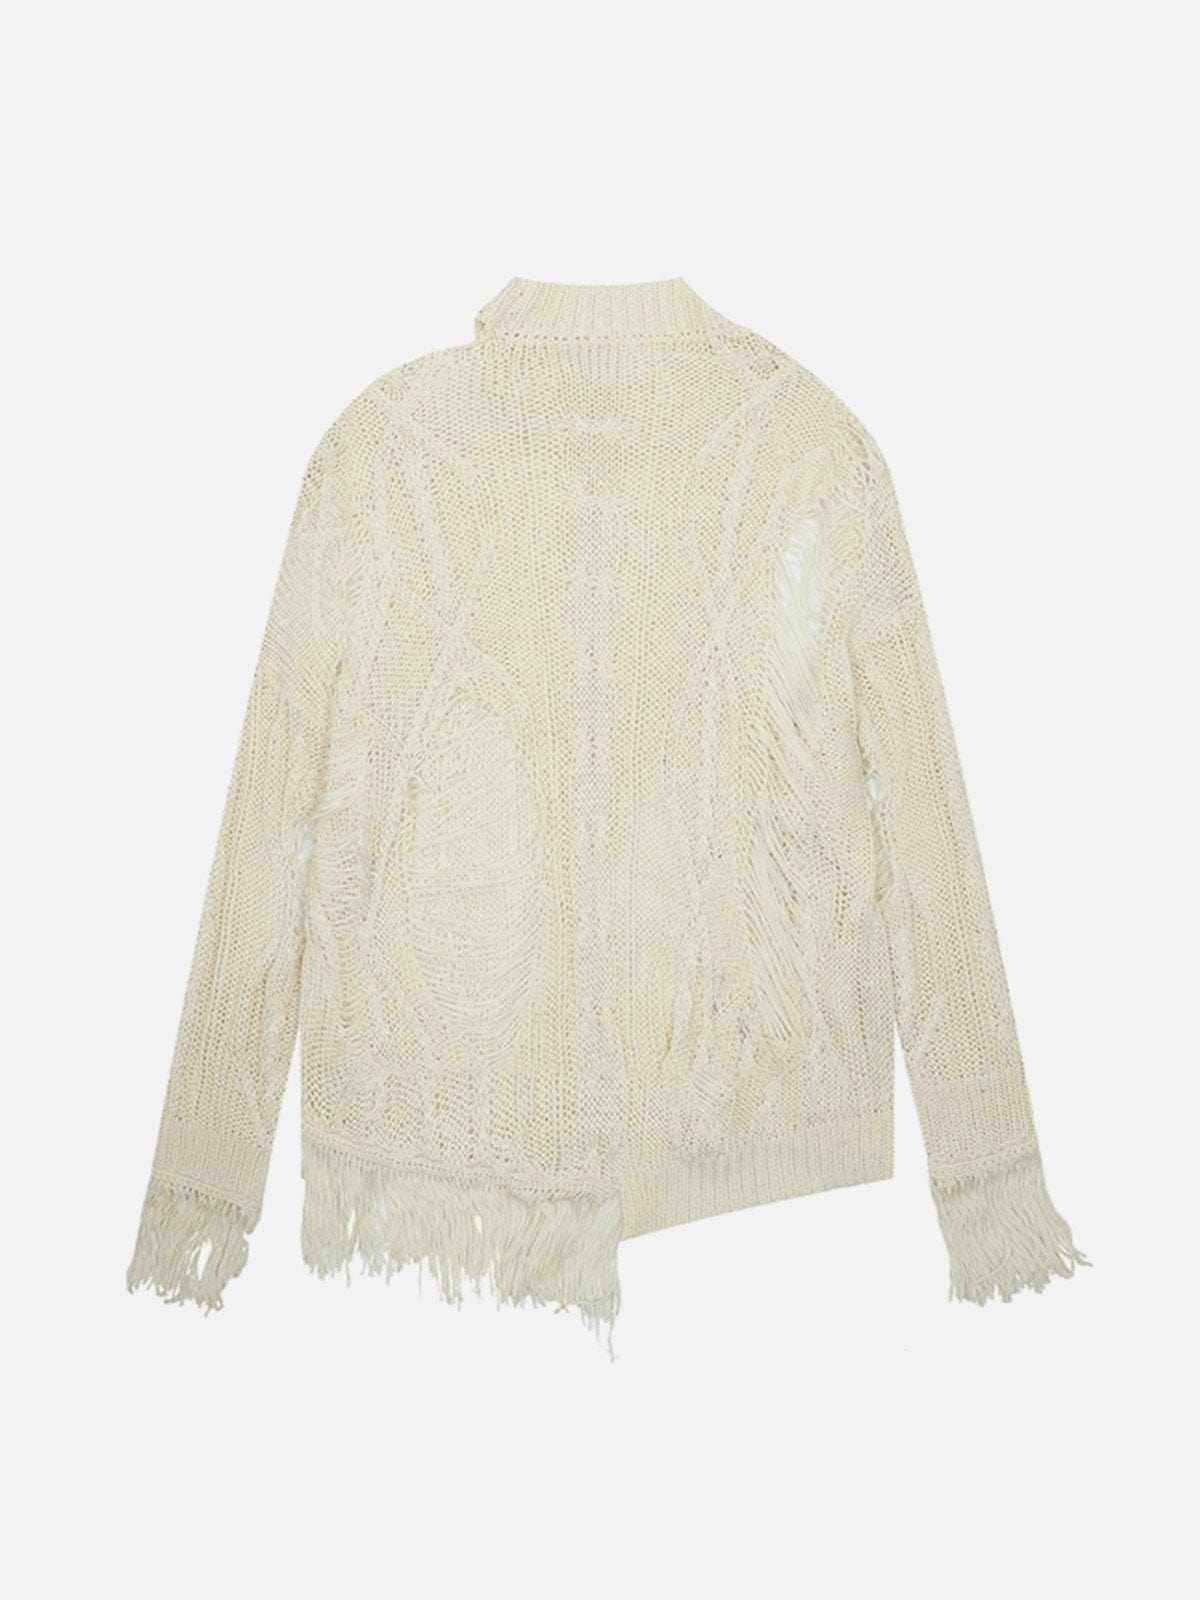 NEV Ripped Fringed Sweater